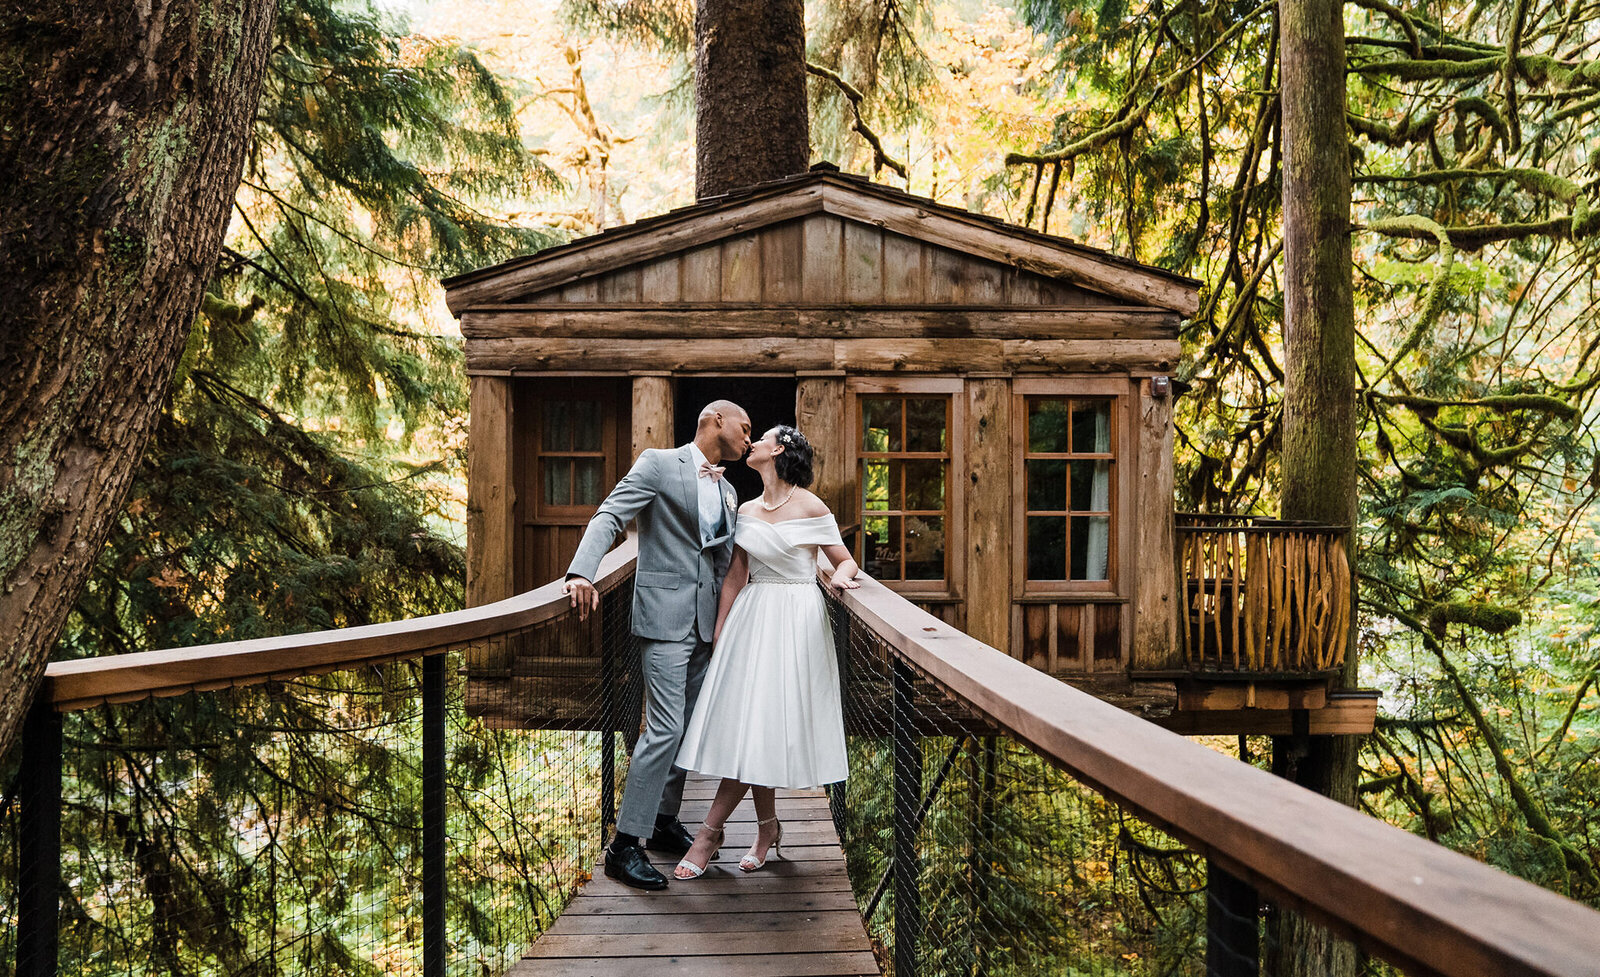 A couple kisses in front of a treehouse at Washington's Treehouse Point photographed by Amy Galbraith